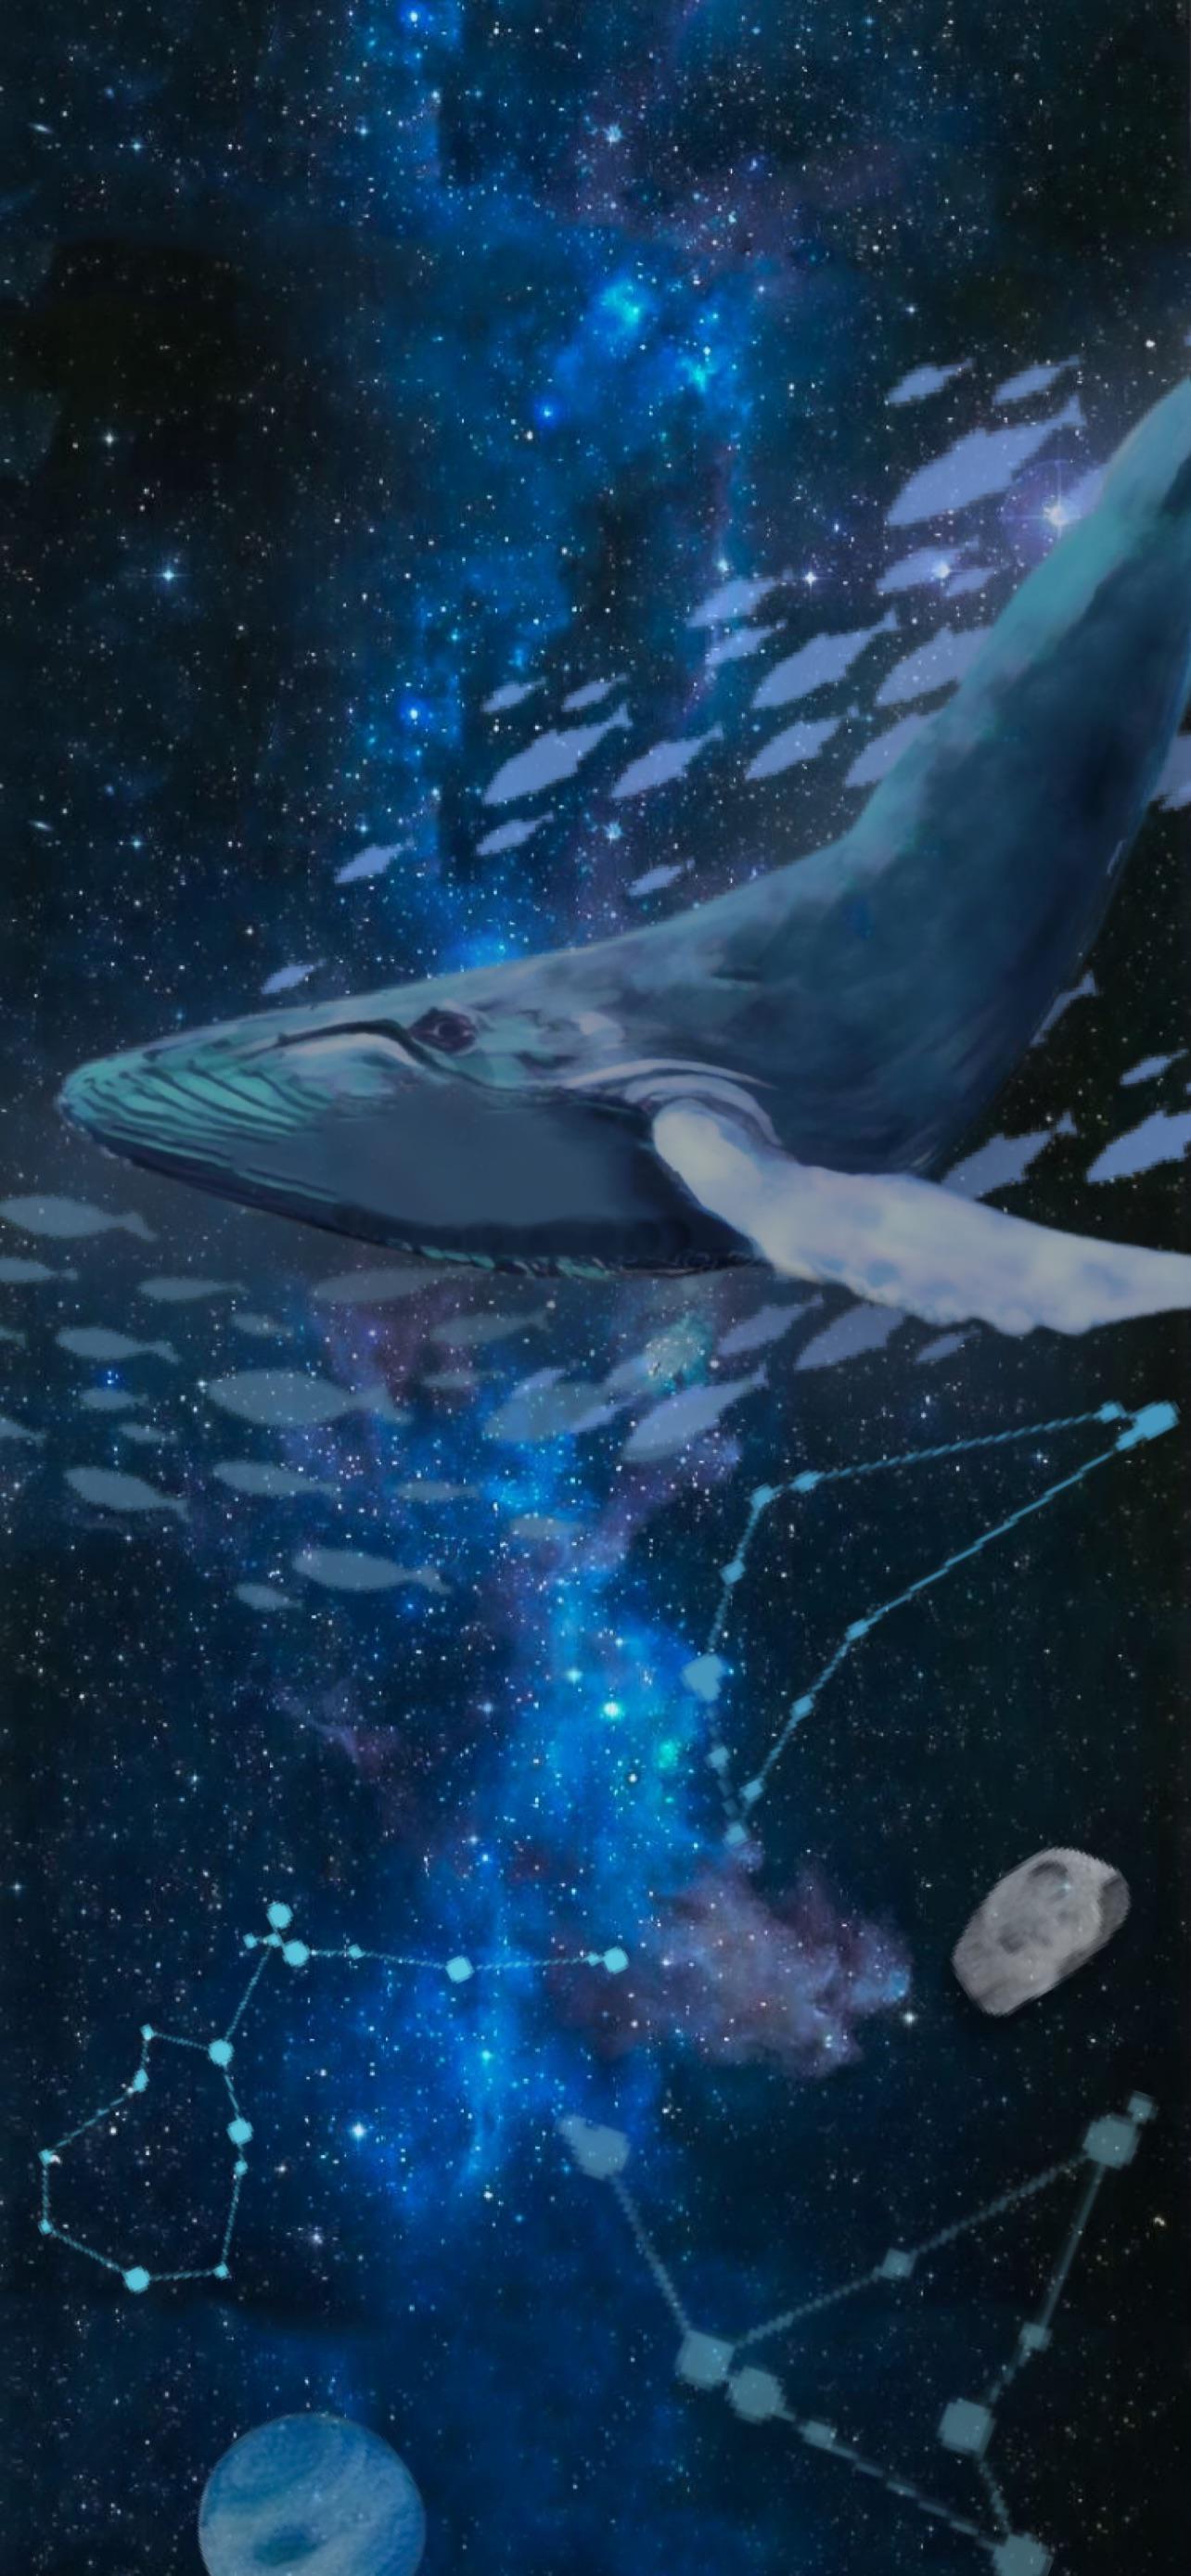 Space Whale Abstract Wallpaper 12 13 Pro Max (1284x2778) R Iphonewallpaper